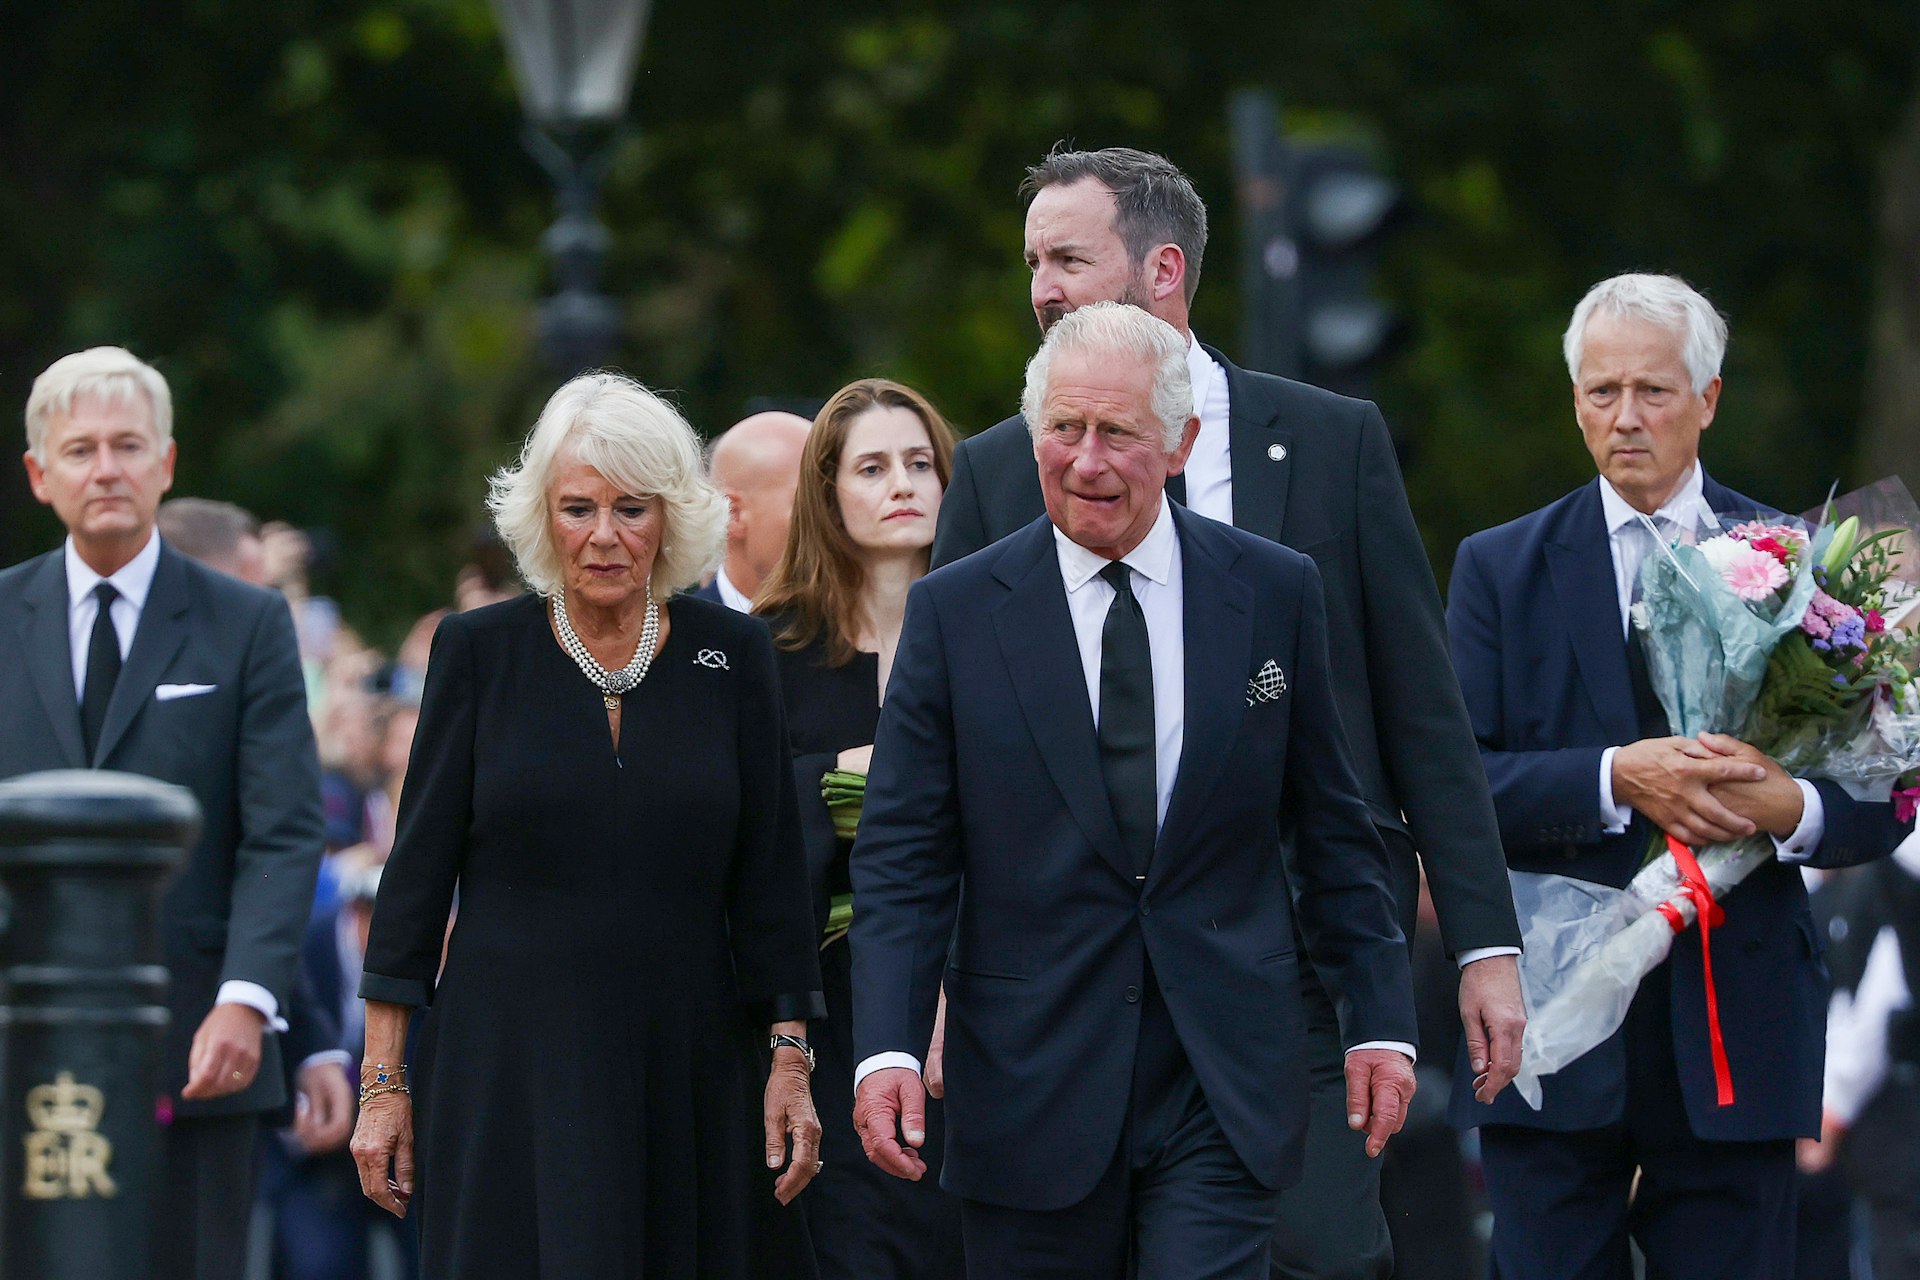 King Charles III, right and Camilla, Queen Consort, look at floral tributes, on the first day of public mourning following the death of Queen Elizabeth II, outside Buckingham Palace in London, UK